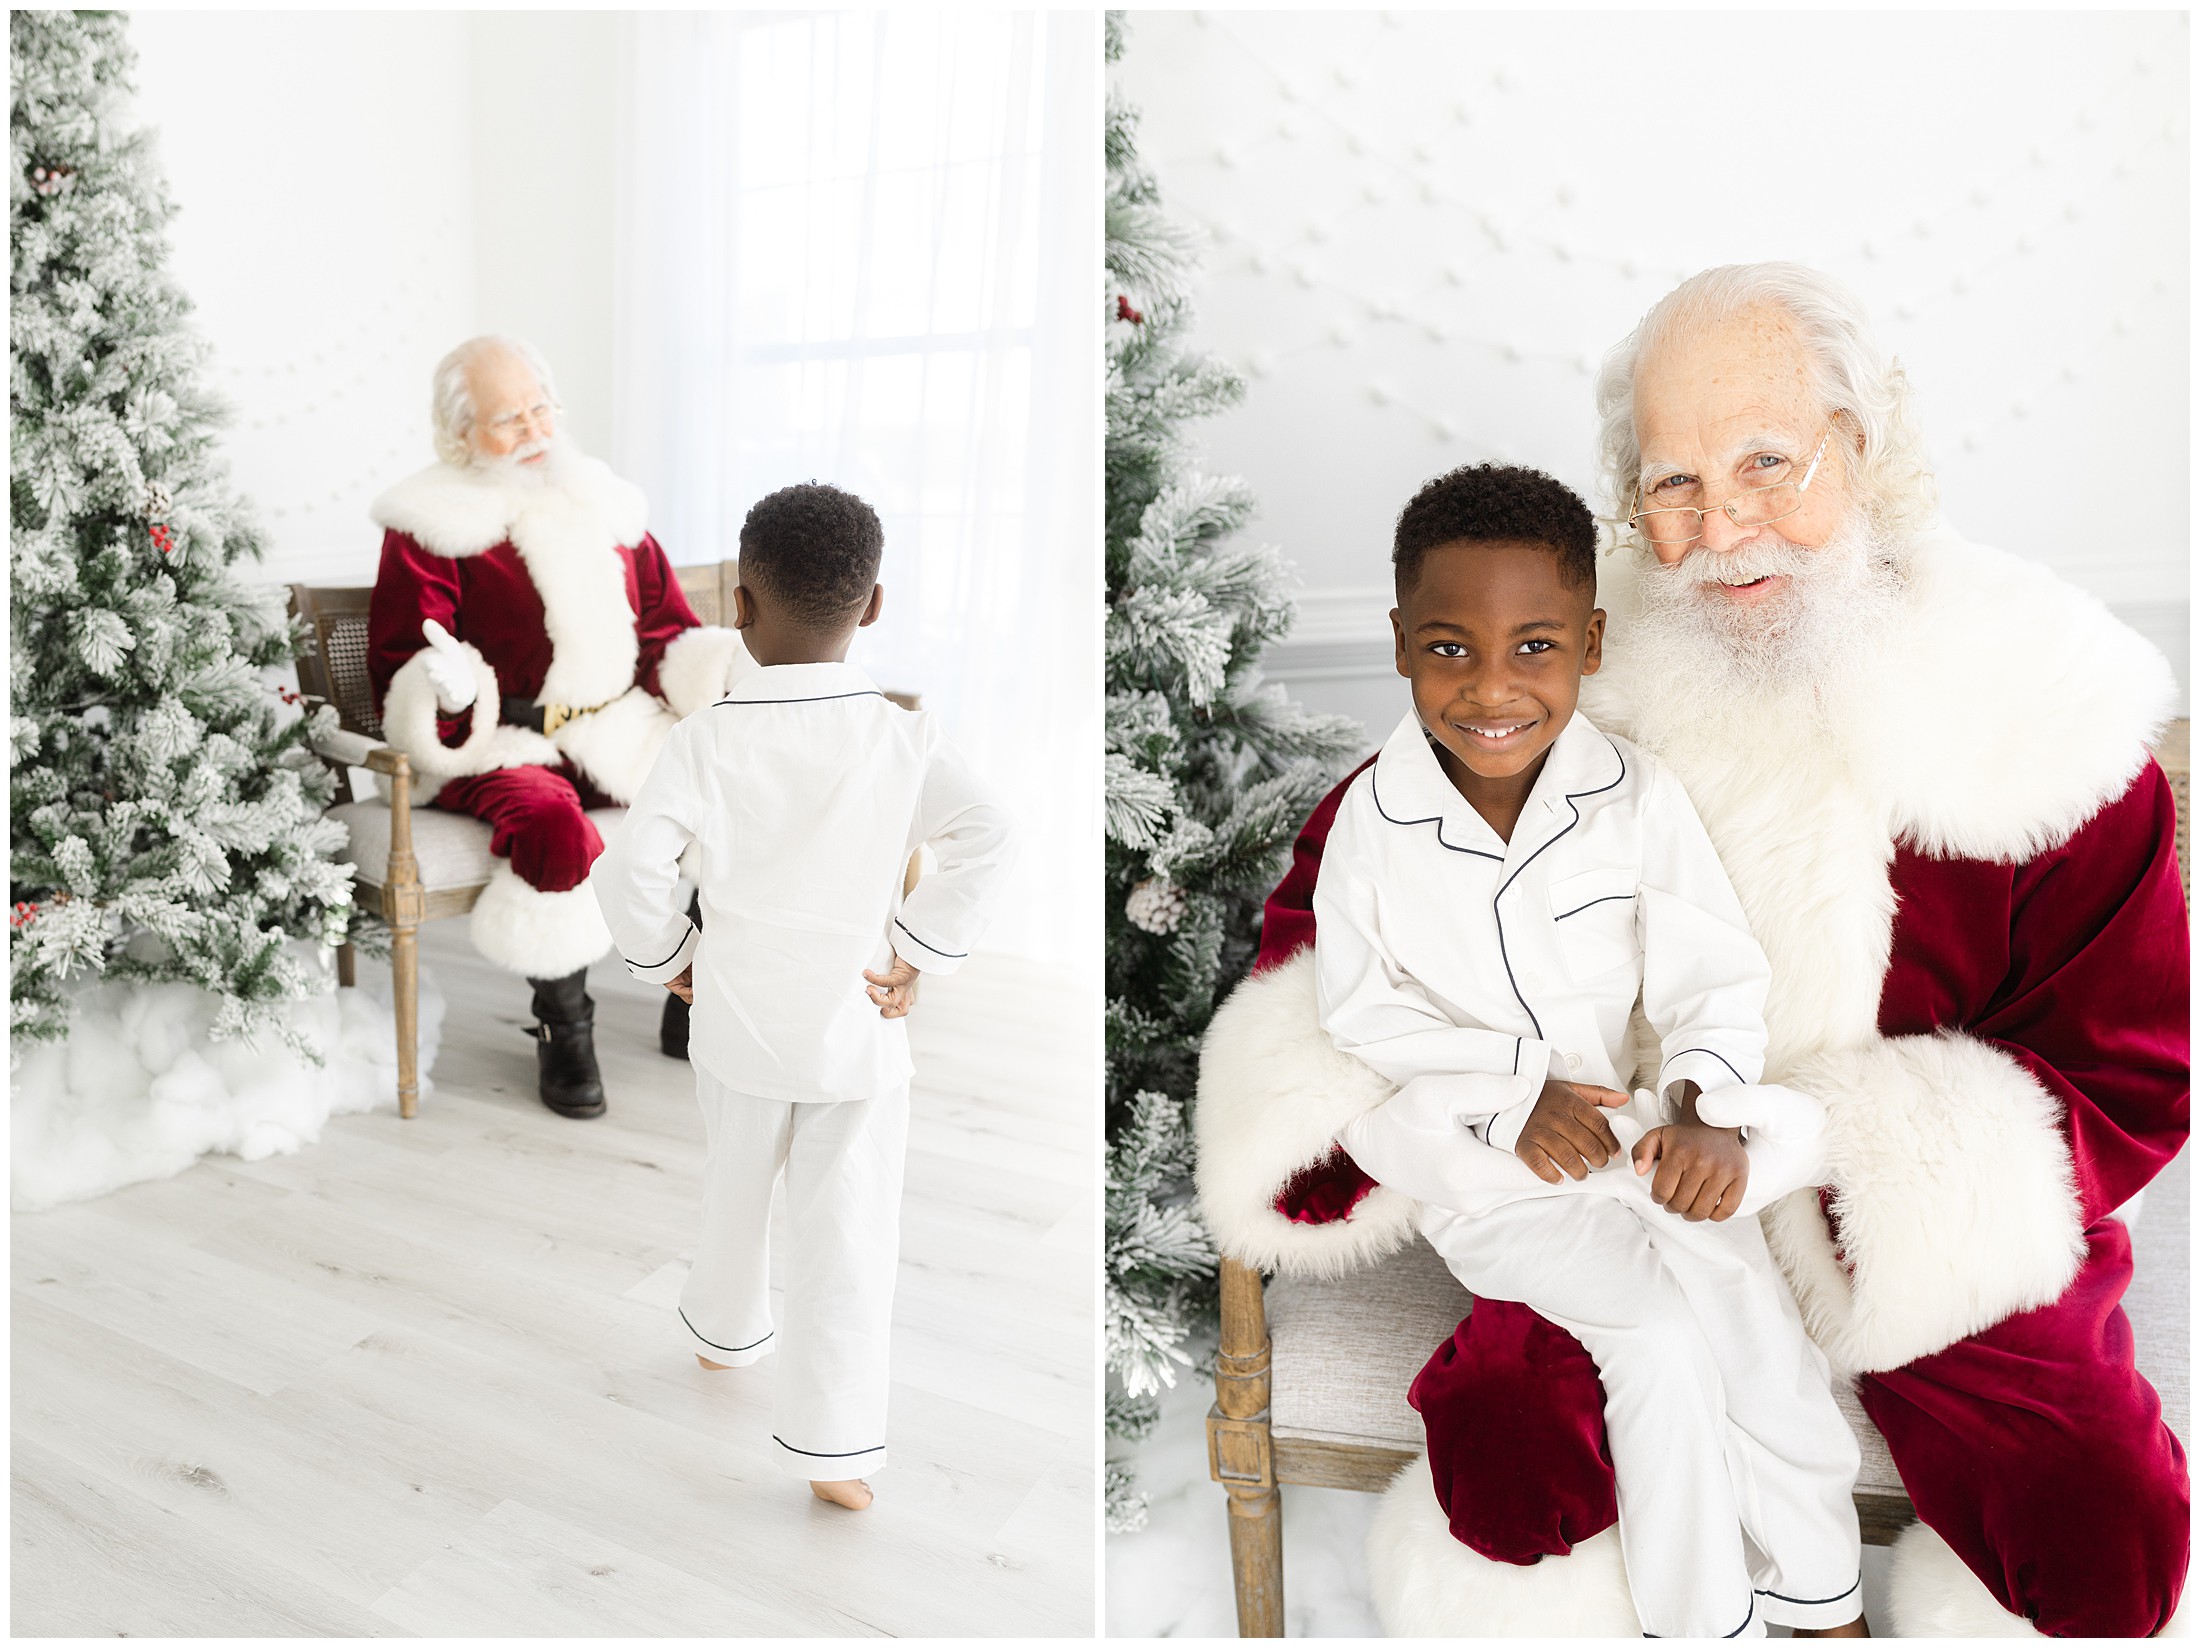 Two images of a young boy walking up to Santa and sitting in Santa's lap smiling for a Marietta Santa photo.